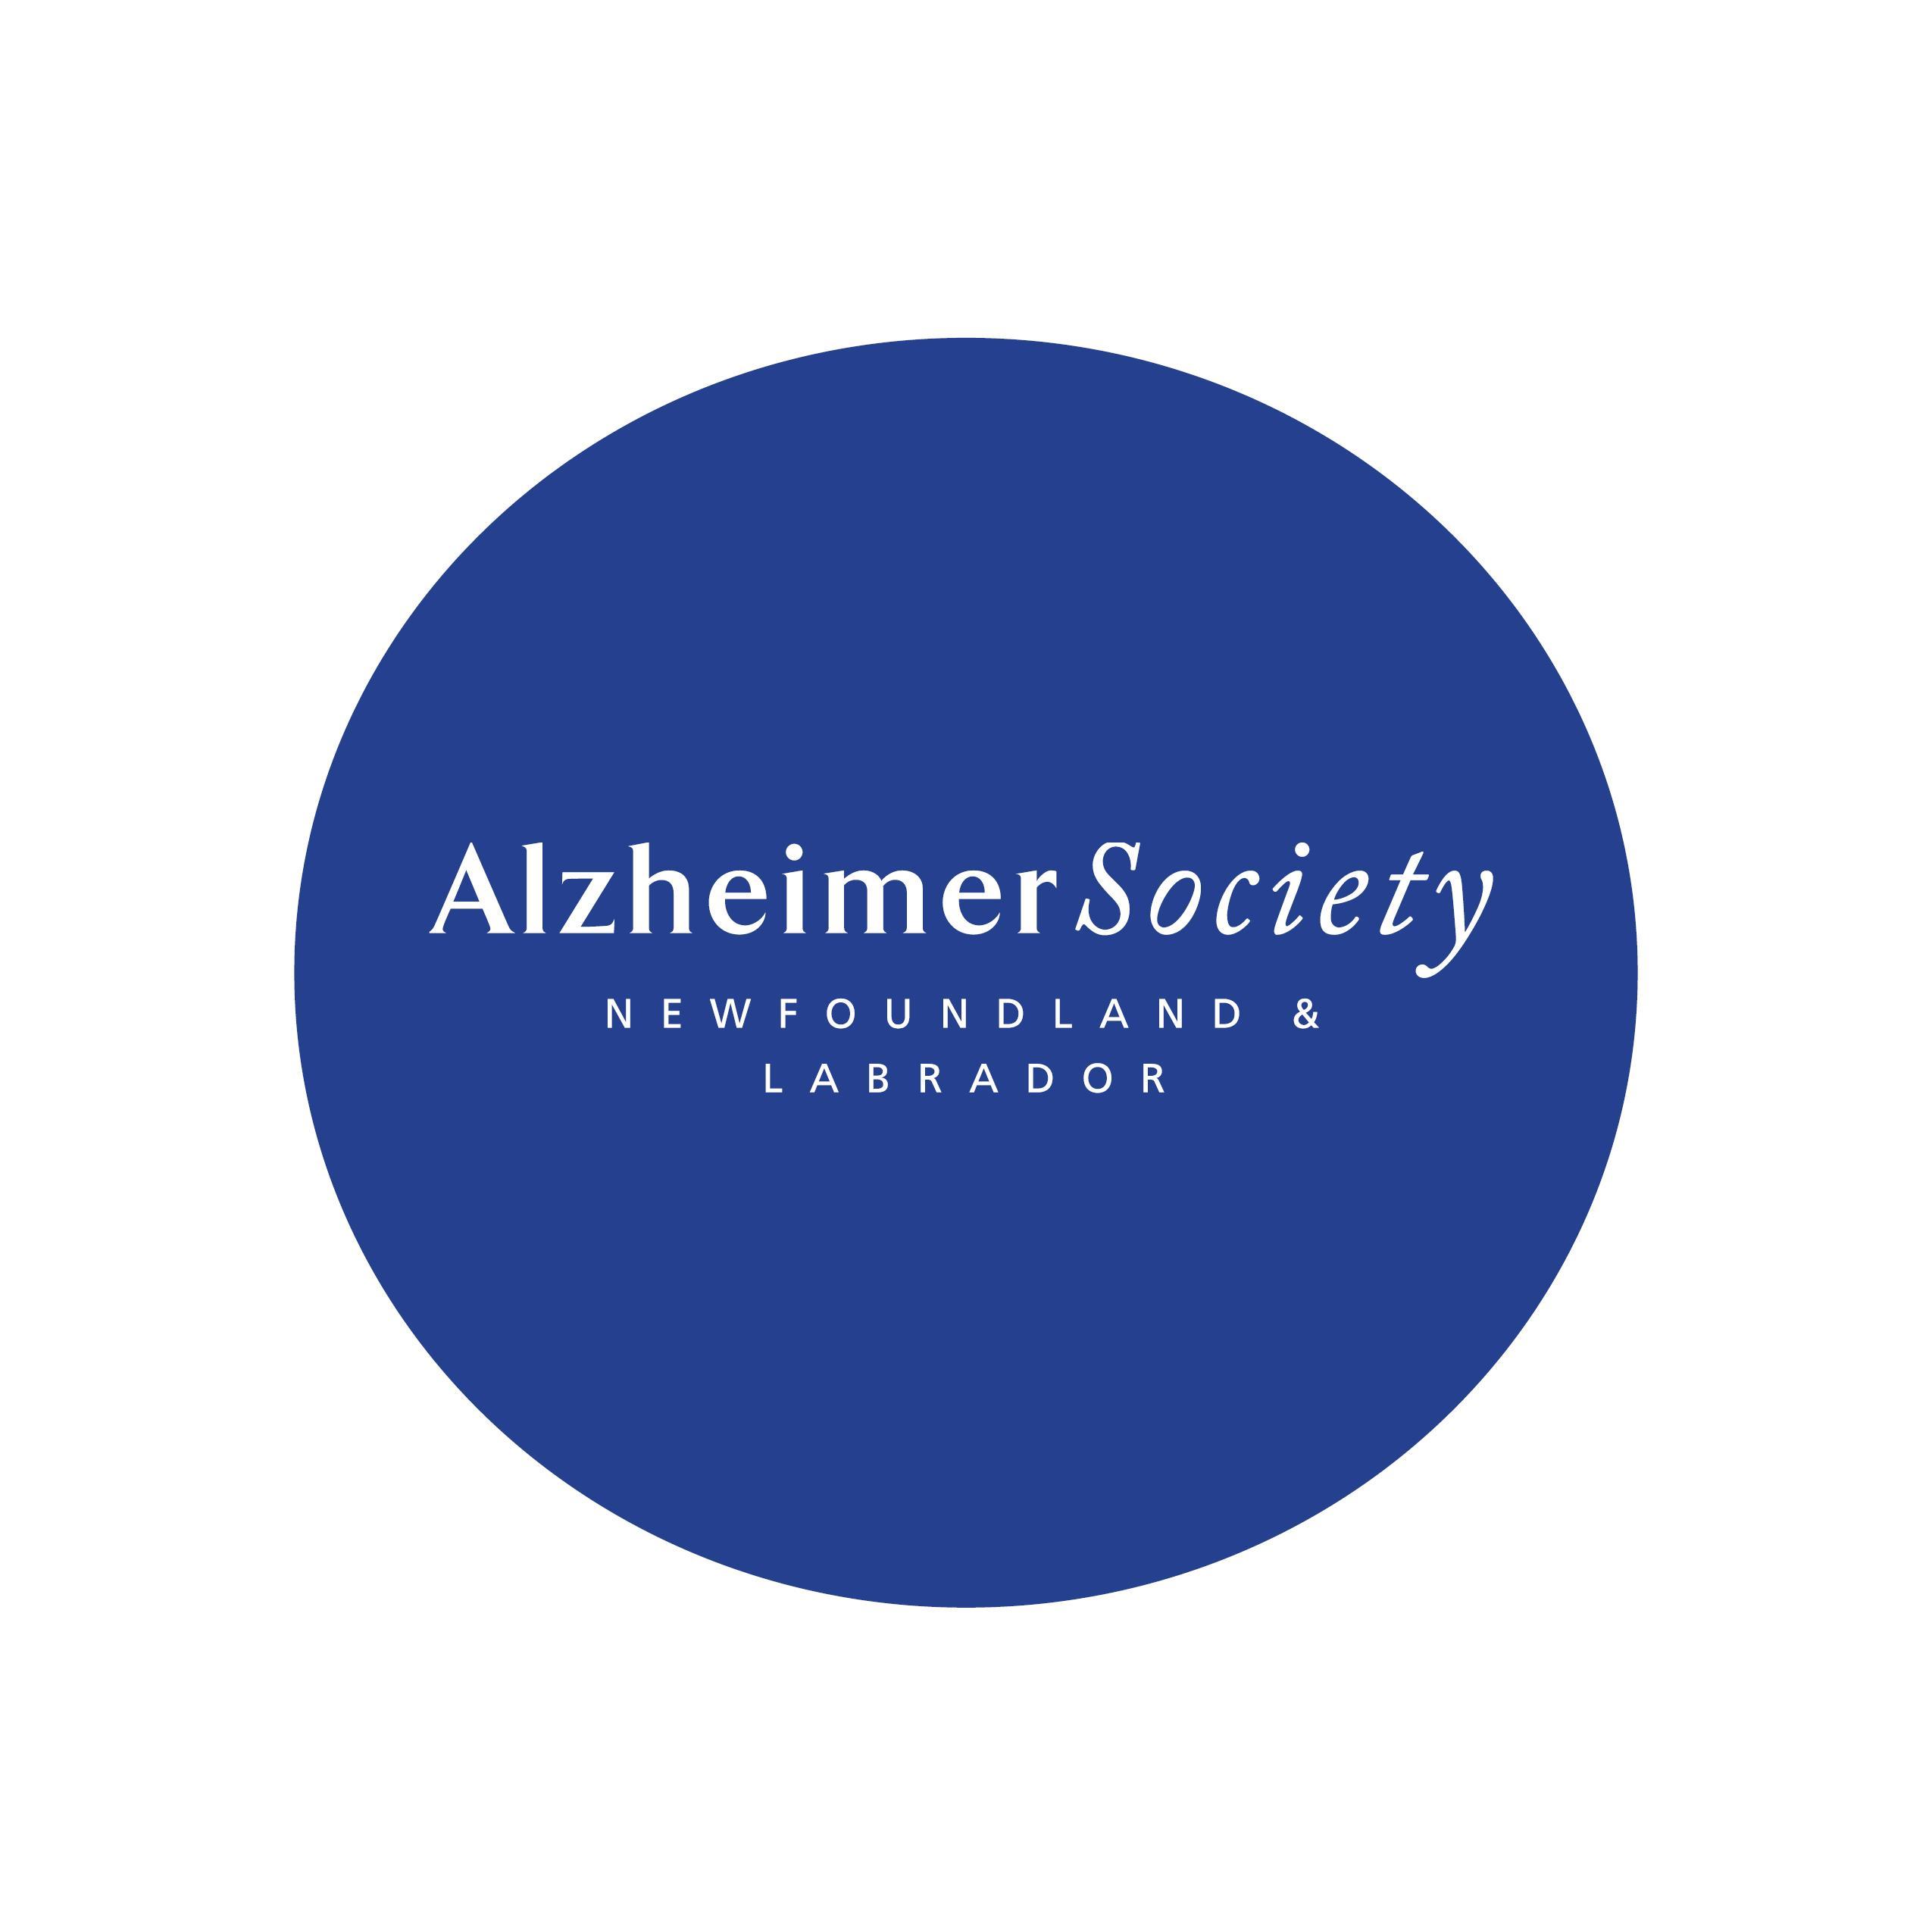 The Alzheimer Society is a health charity dedicated to providing education and support to those affected in Newfoundland and Labrador
https://t.co/DPv8B8jXtE